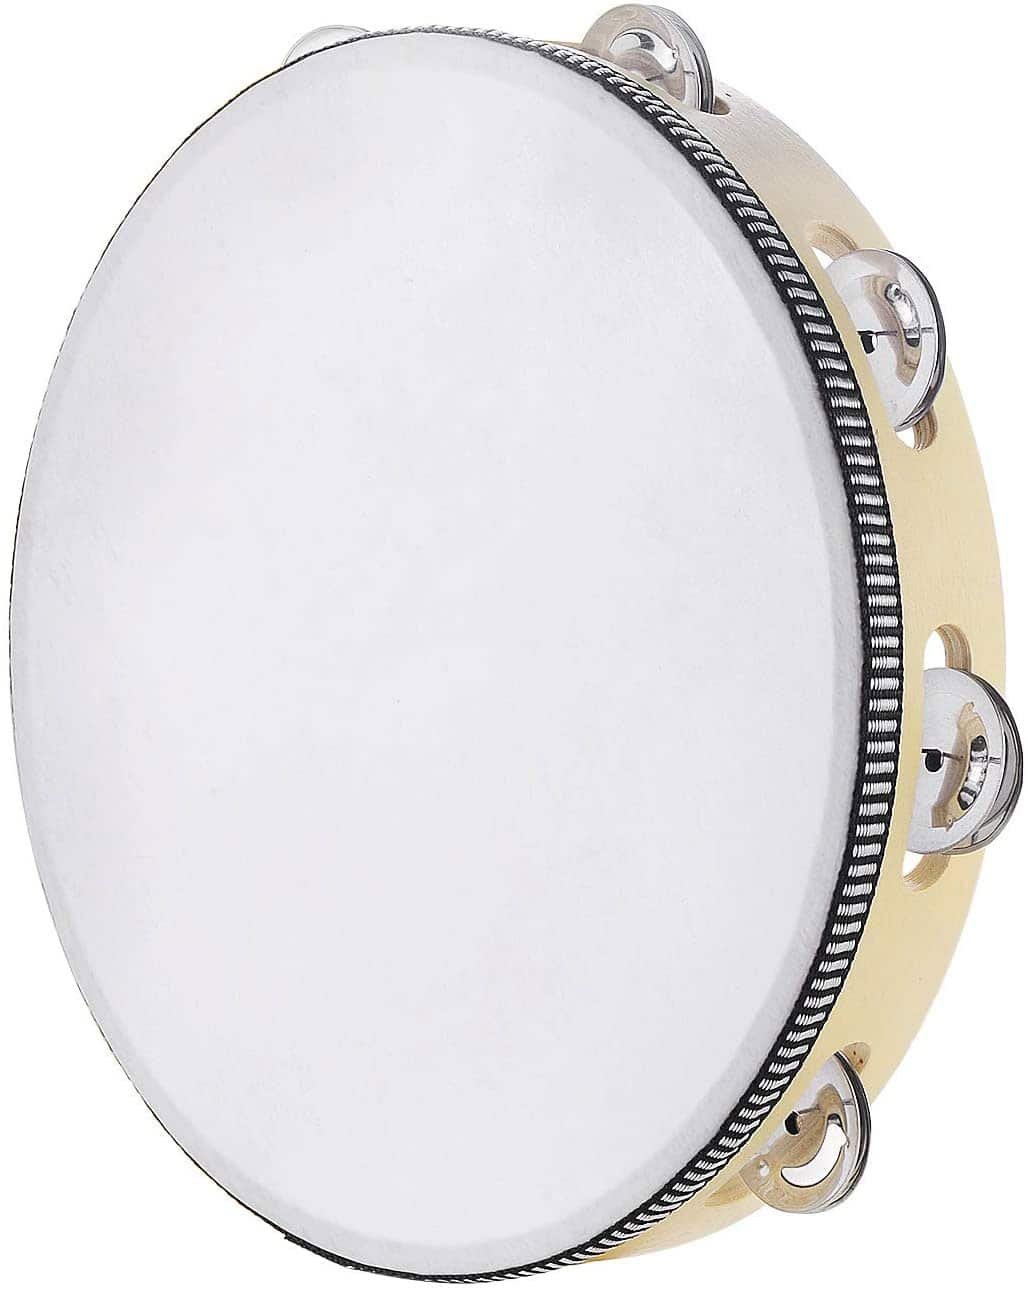 Musfunny 10 inch Tambourine for adults